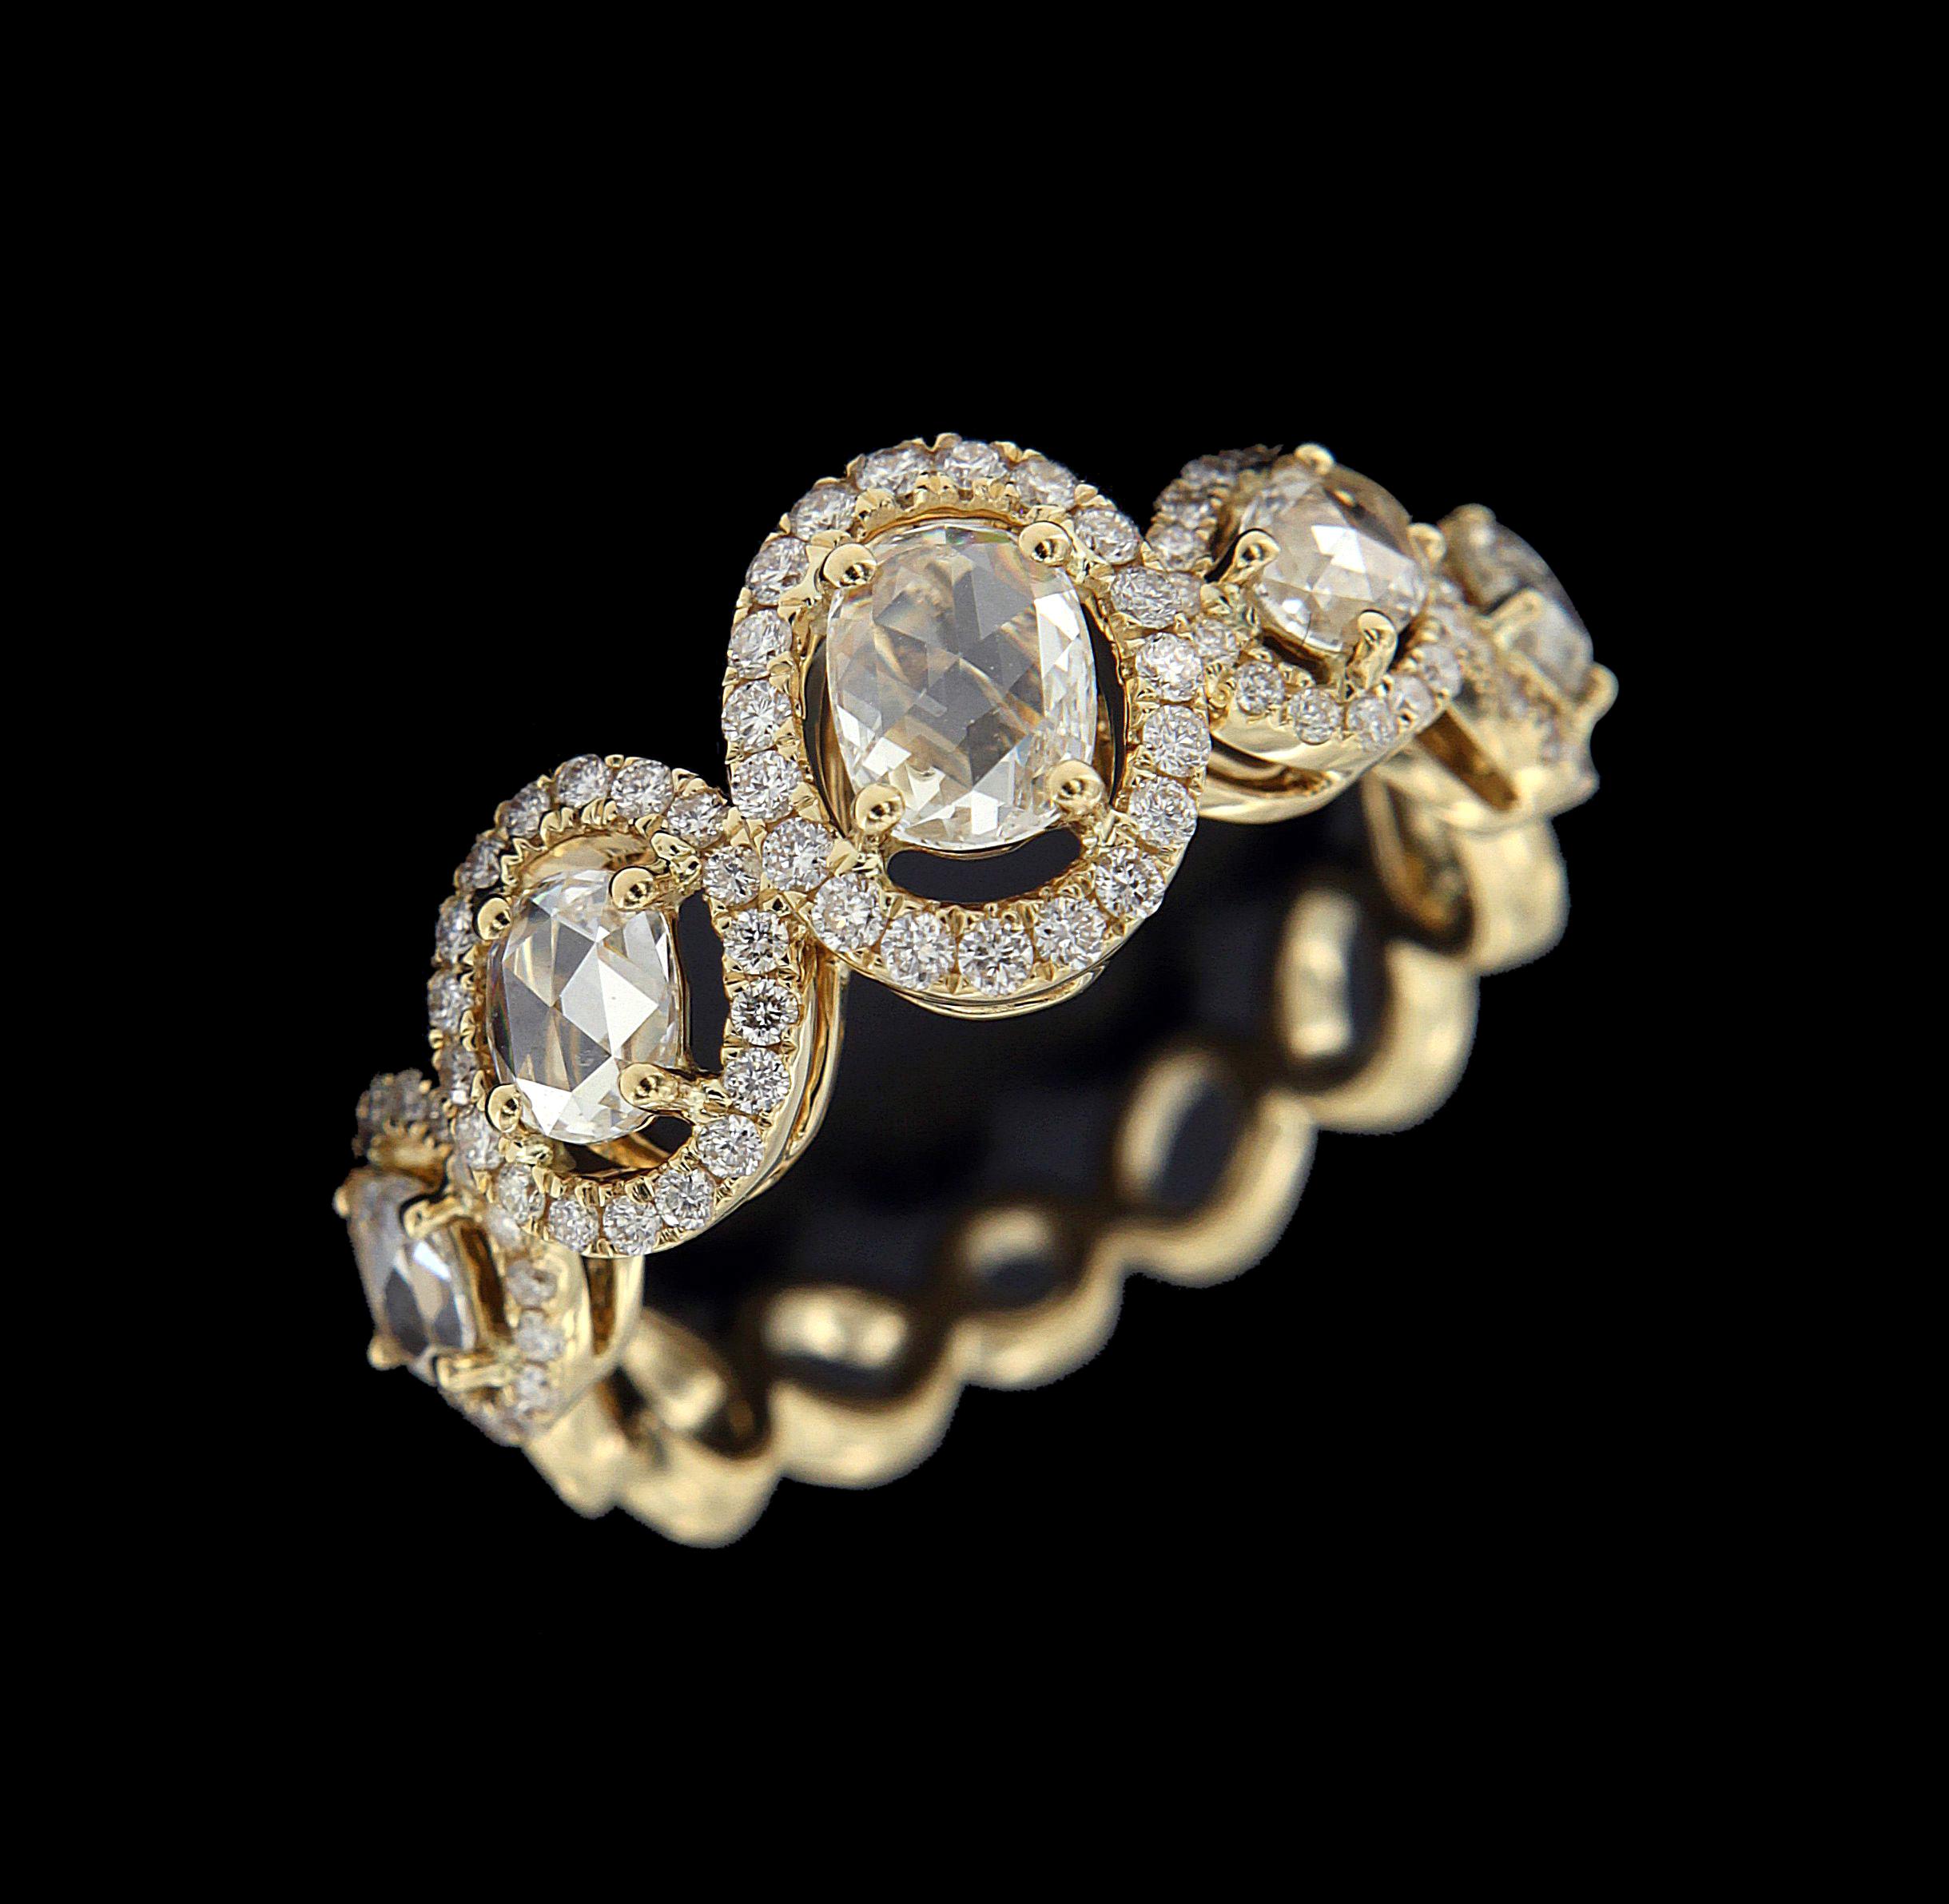 Valentine's Day: Elegant 18 Karat Yellow Gold And Brown Rose Cut Diamond Ring 
Ring 
Brown rose cut Diamonds weighing approximately around 1.261 carats , mounted on 18 karat yellow gold  . The ring weighs around 5.068  grams approximately. 

Please